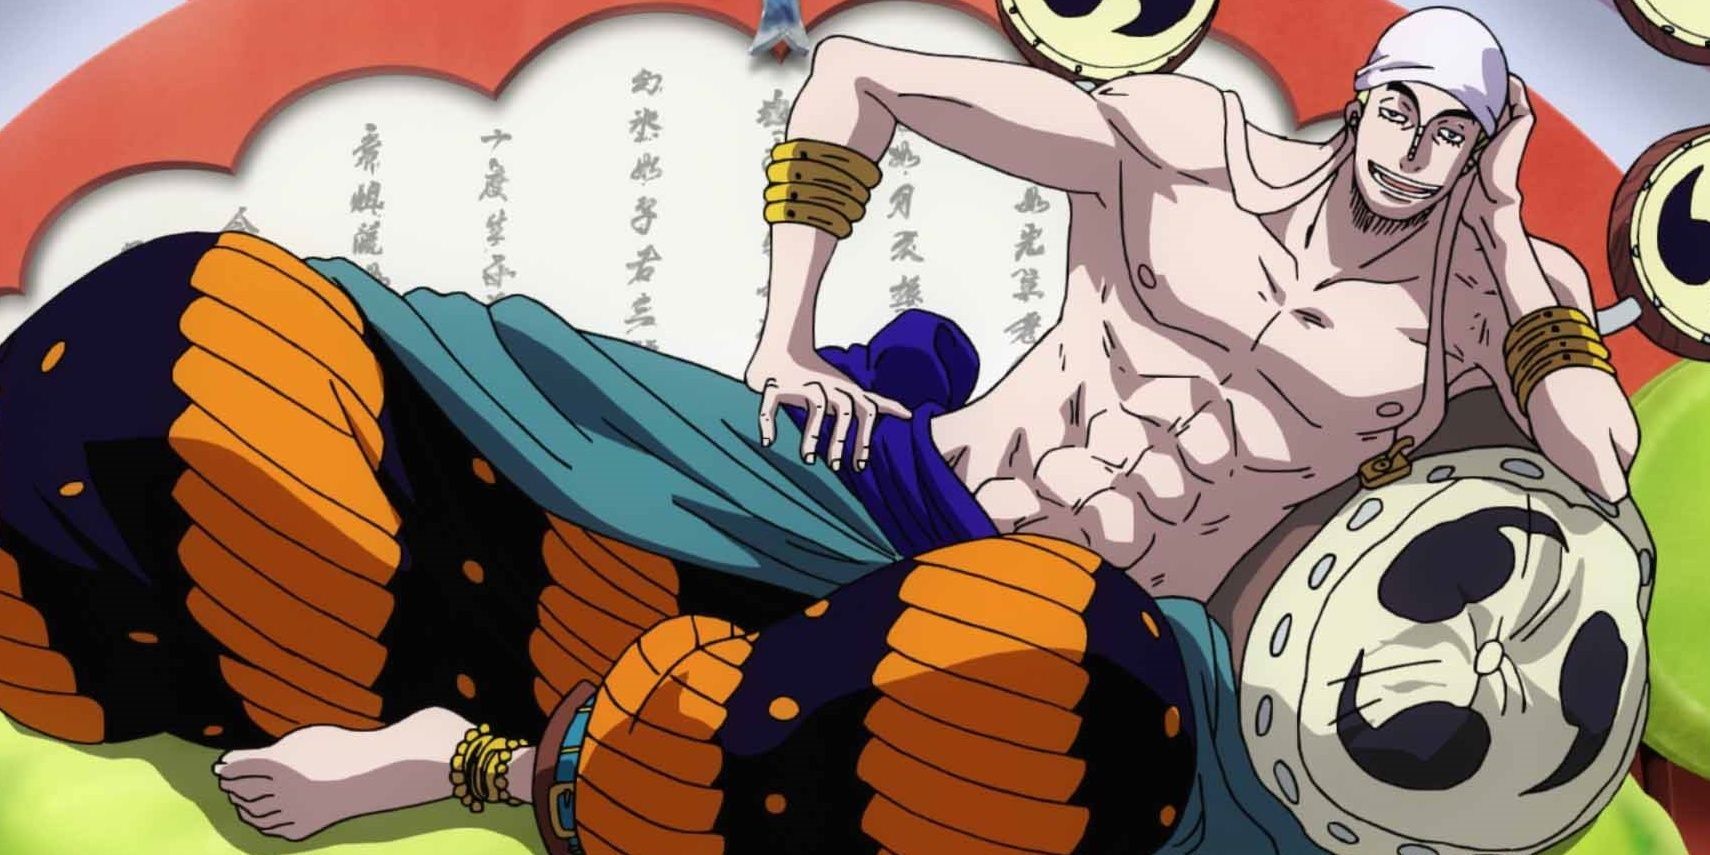 Enel from One Piece lounging on a pillow